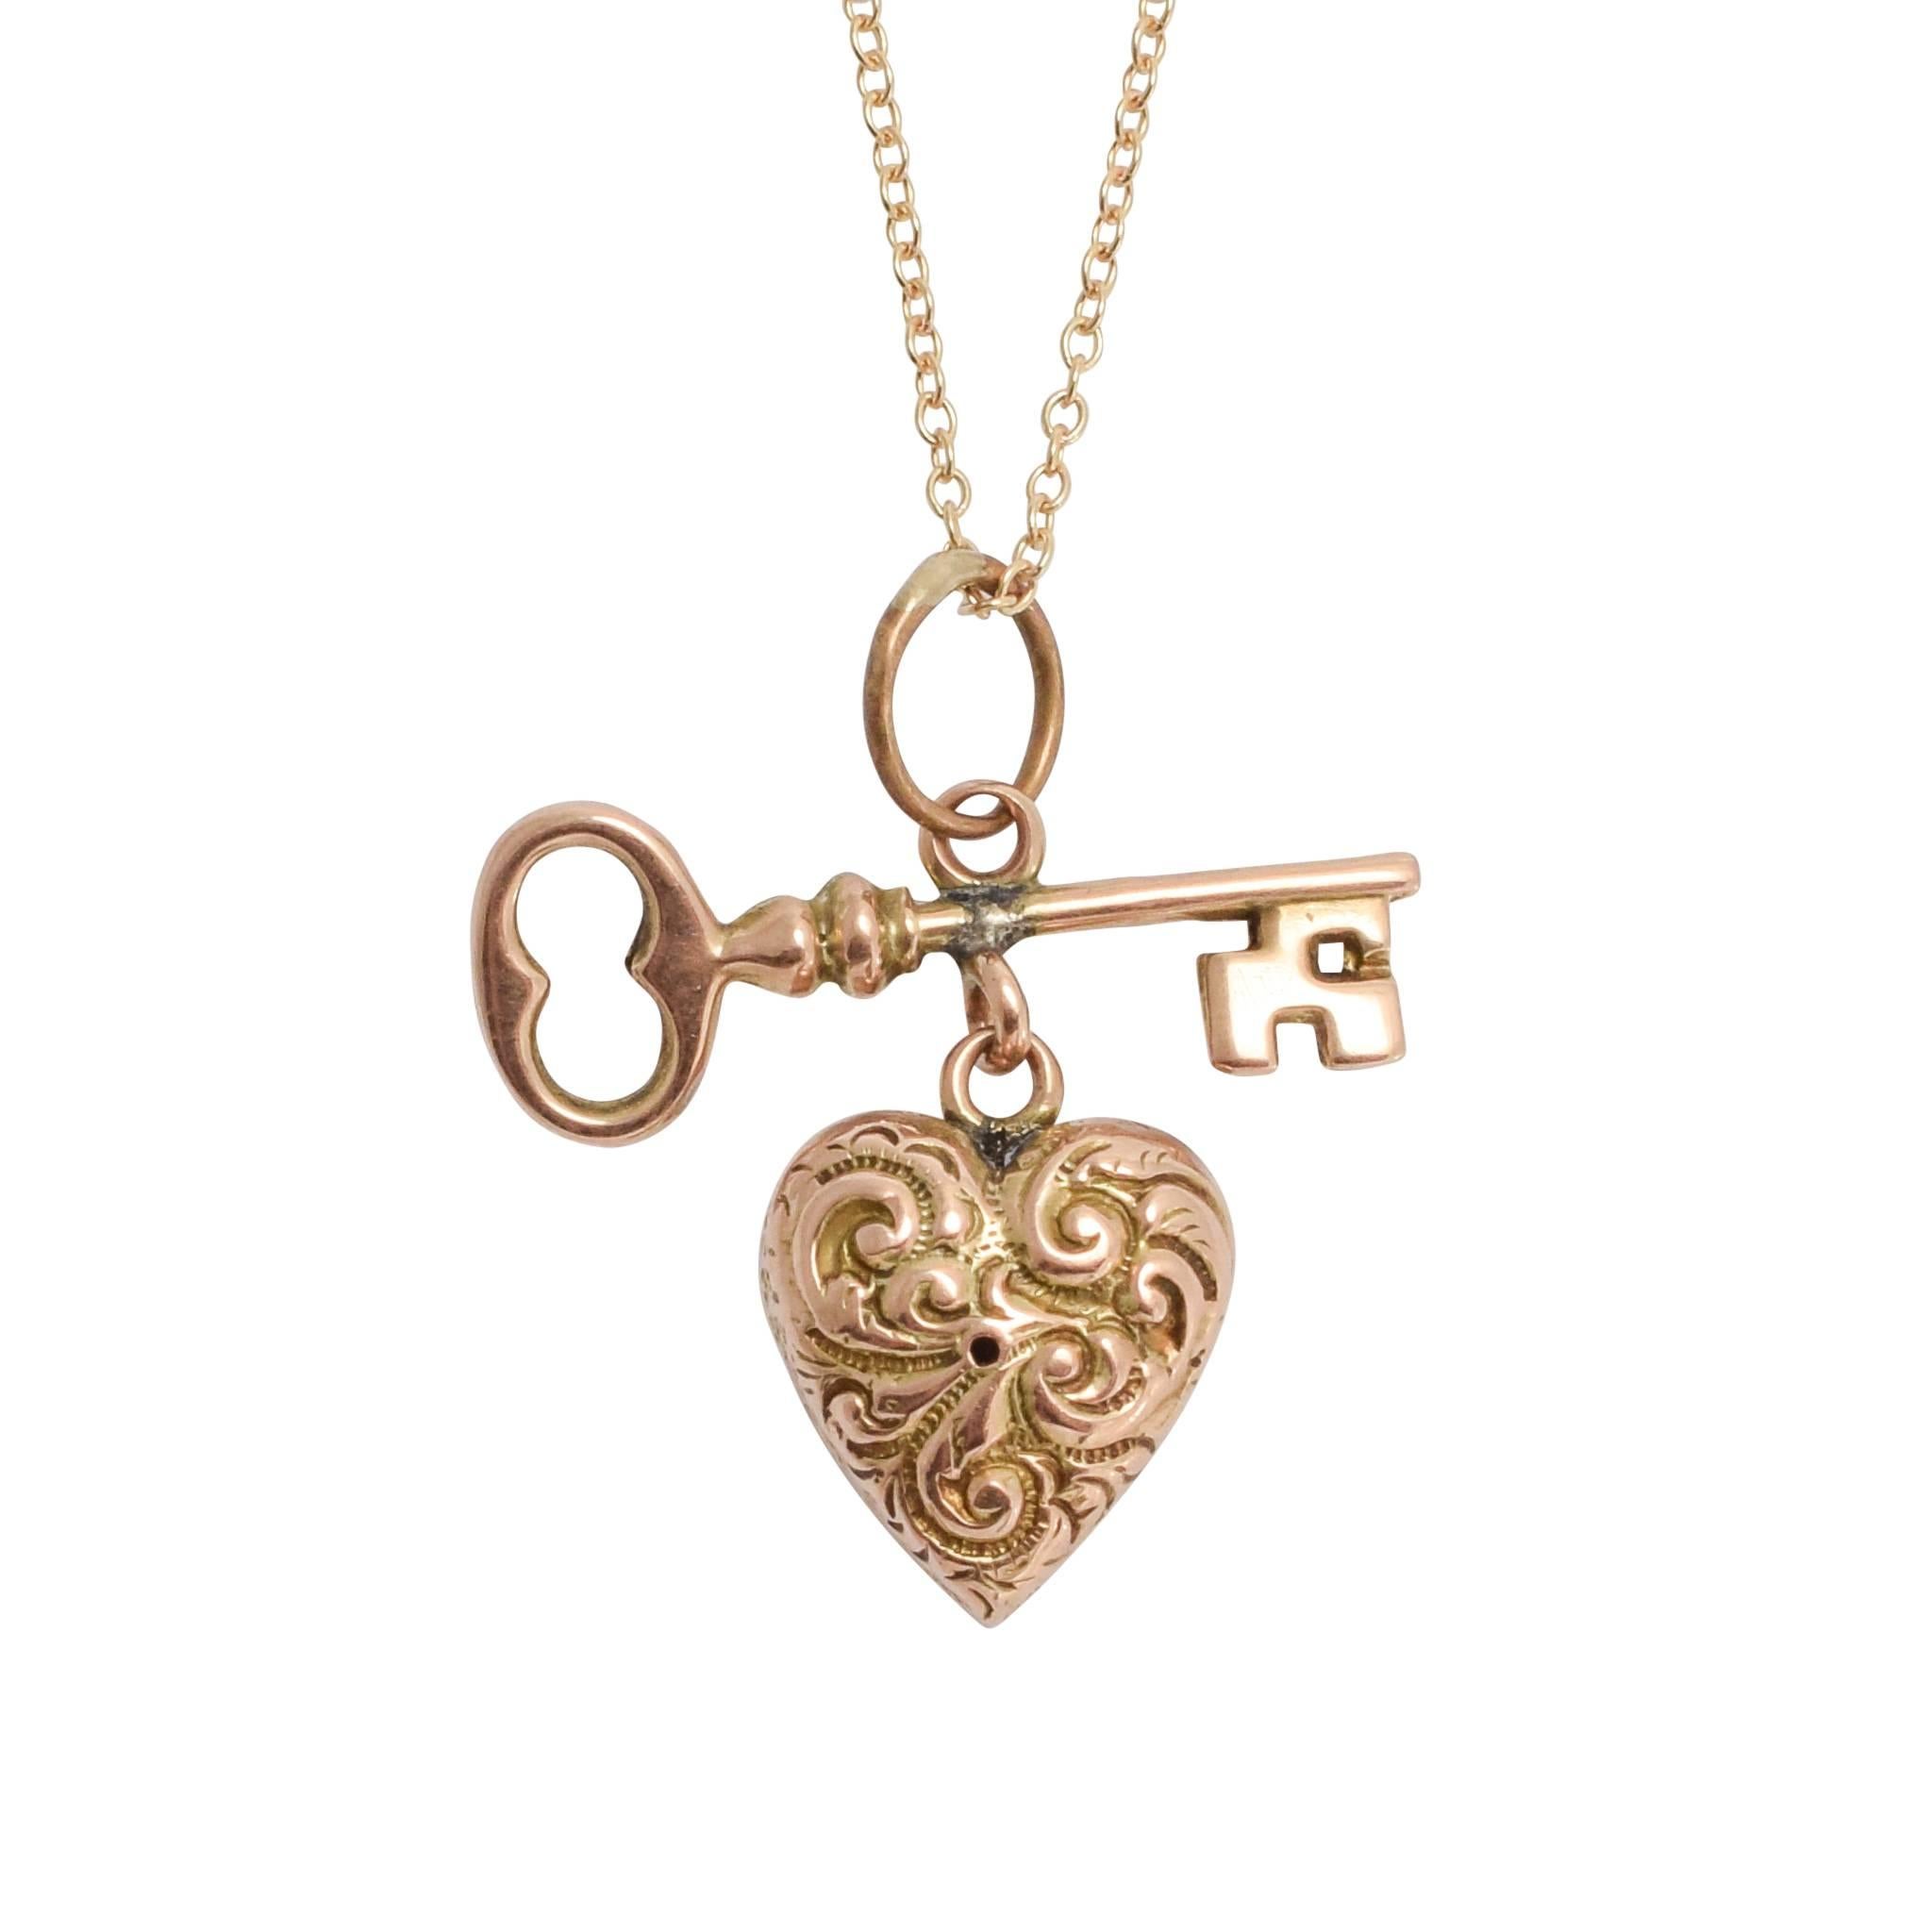 Antique Victorian "Key to My Heart" Gold Pendant Necklace